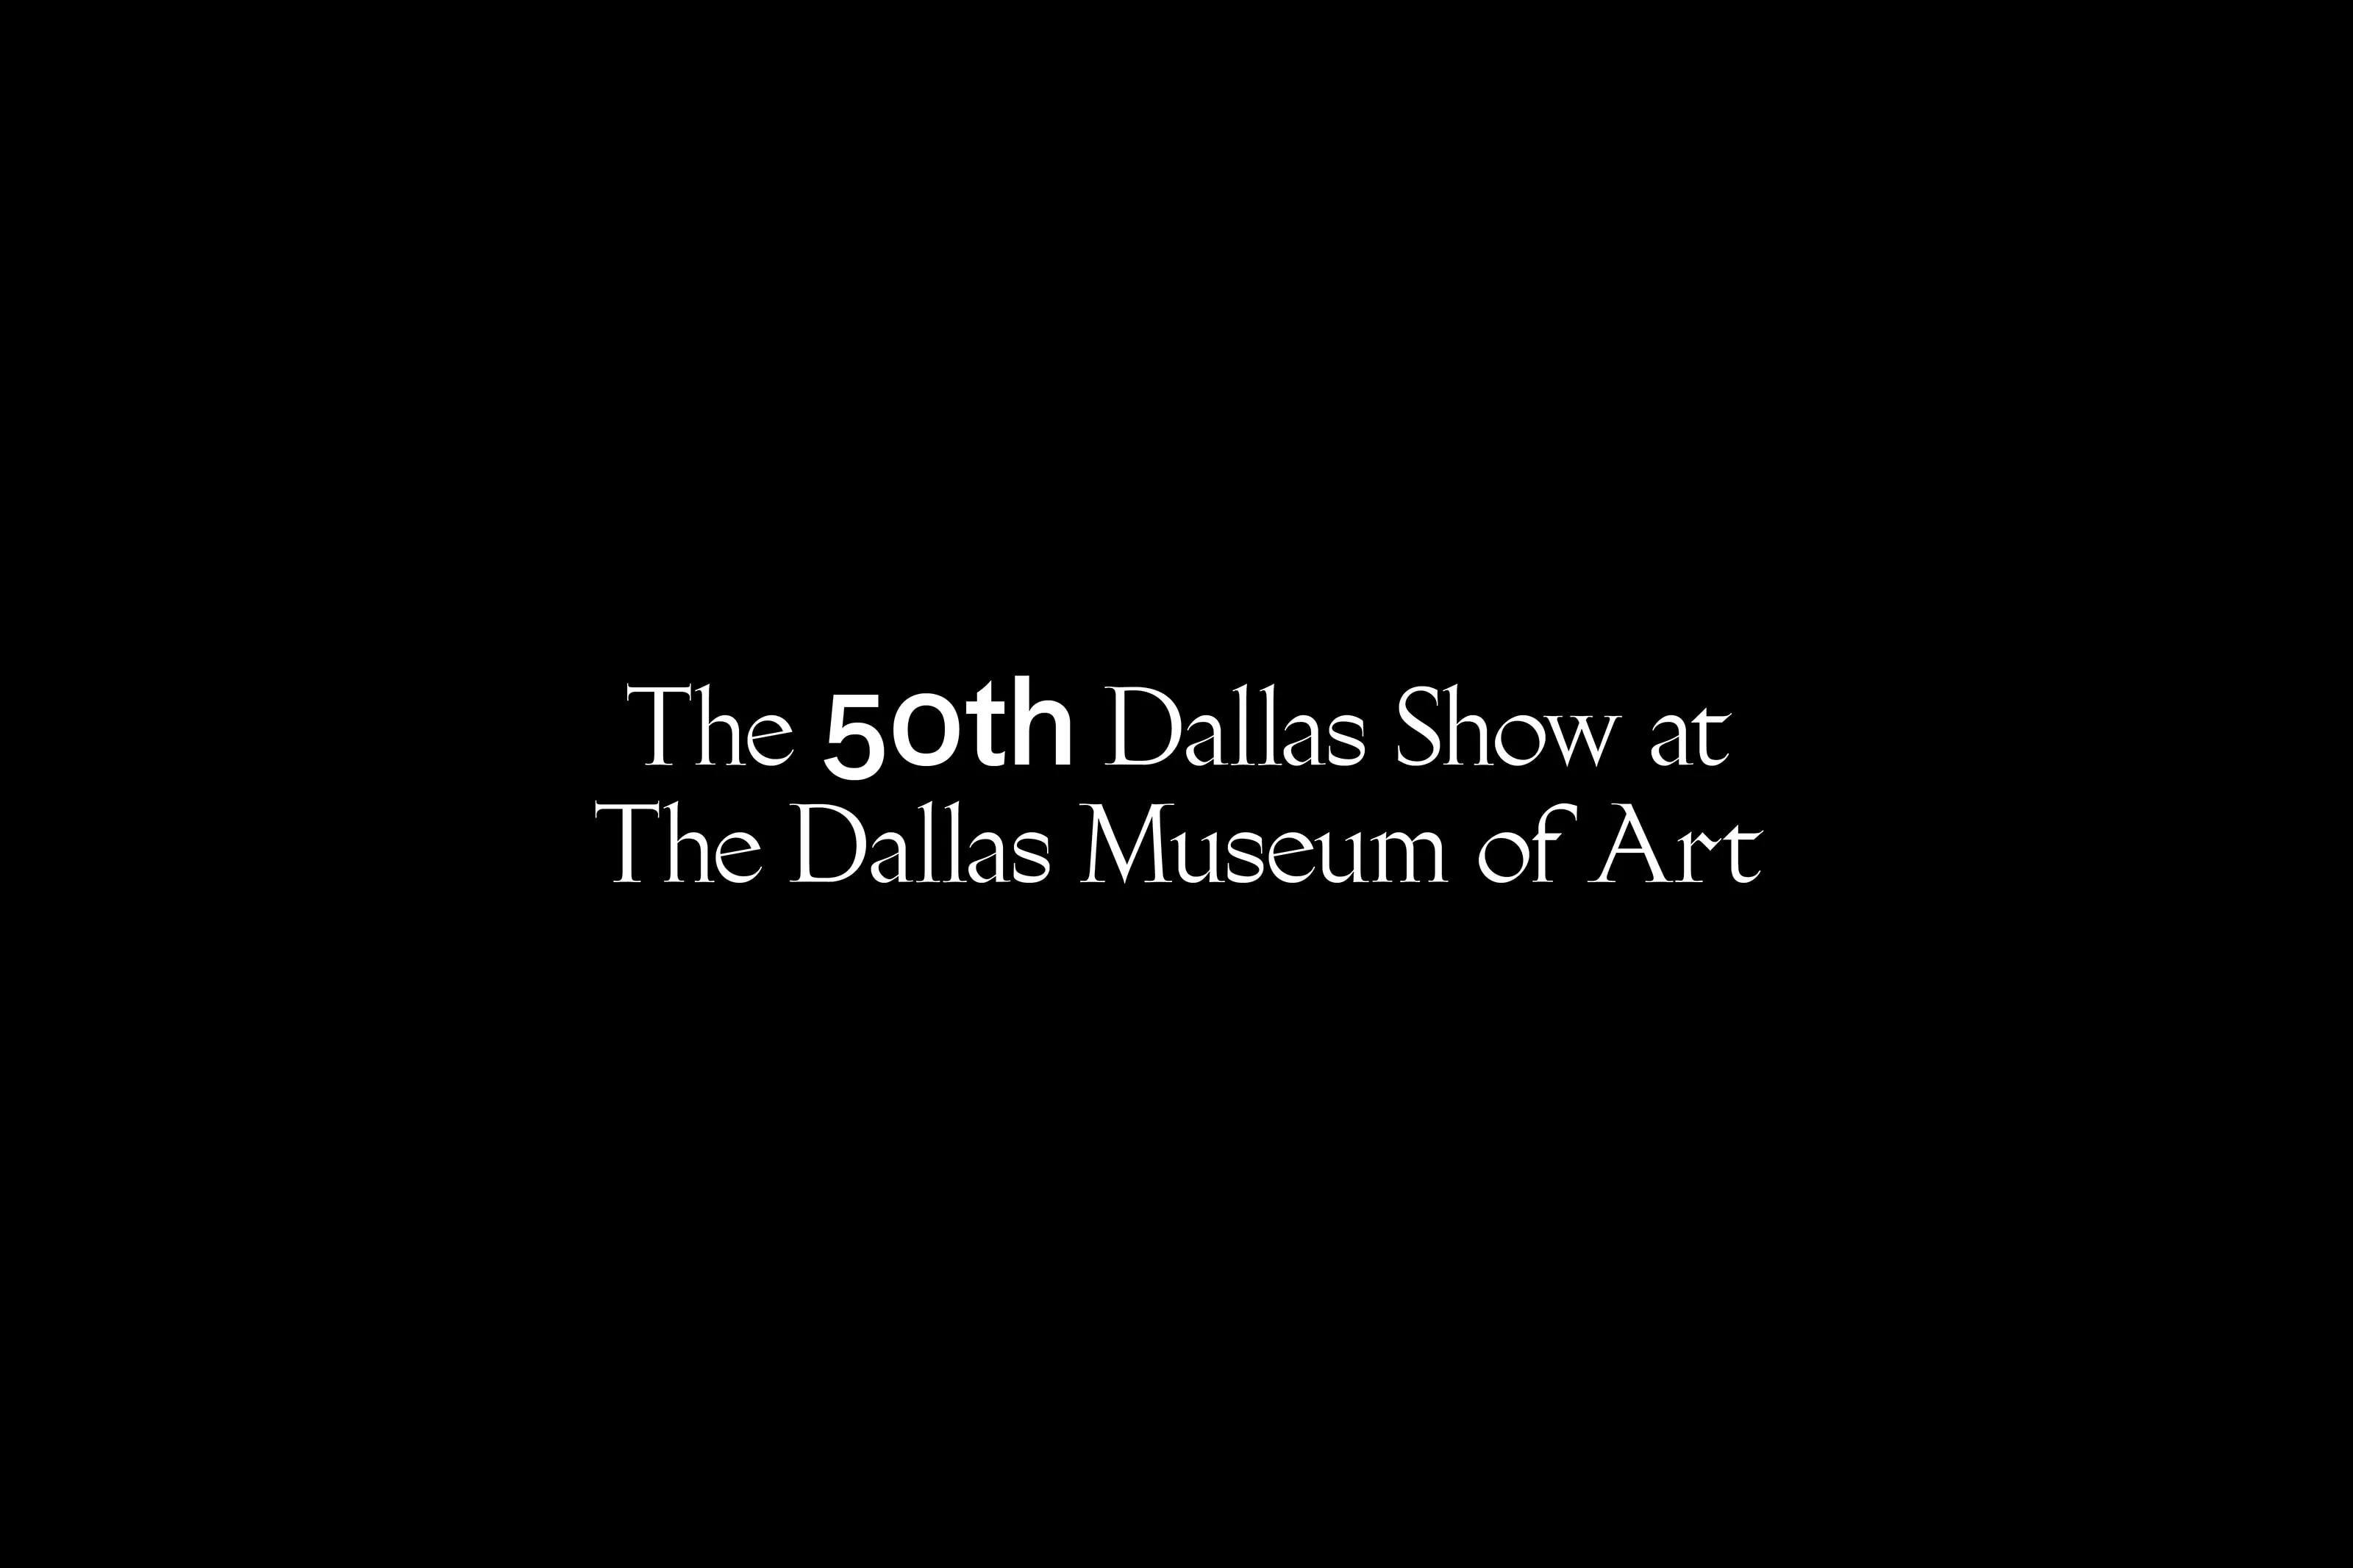 White text reading "The 50th Dallas Show at The Dallas Museum of Art" on a black background